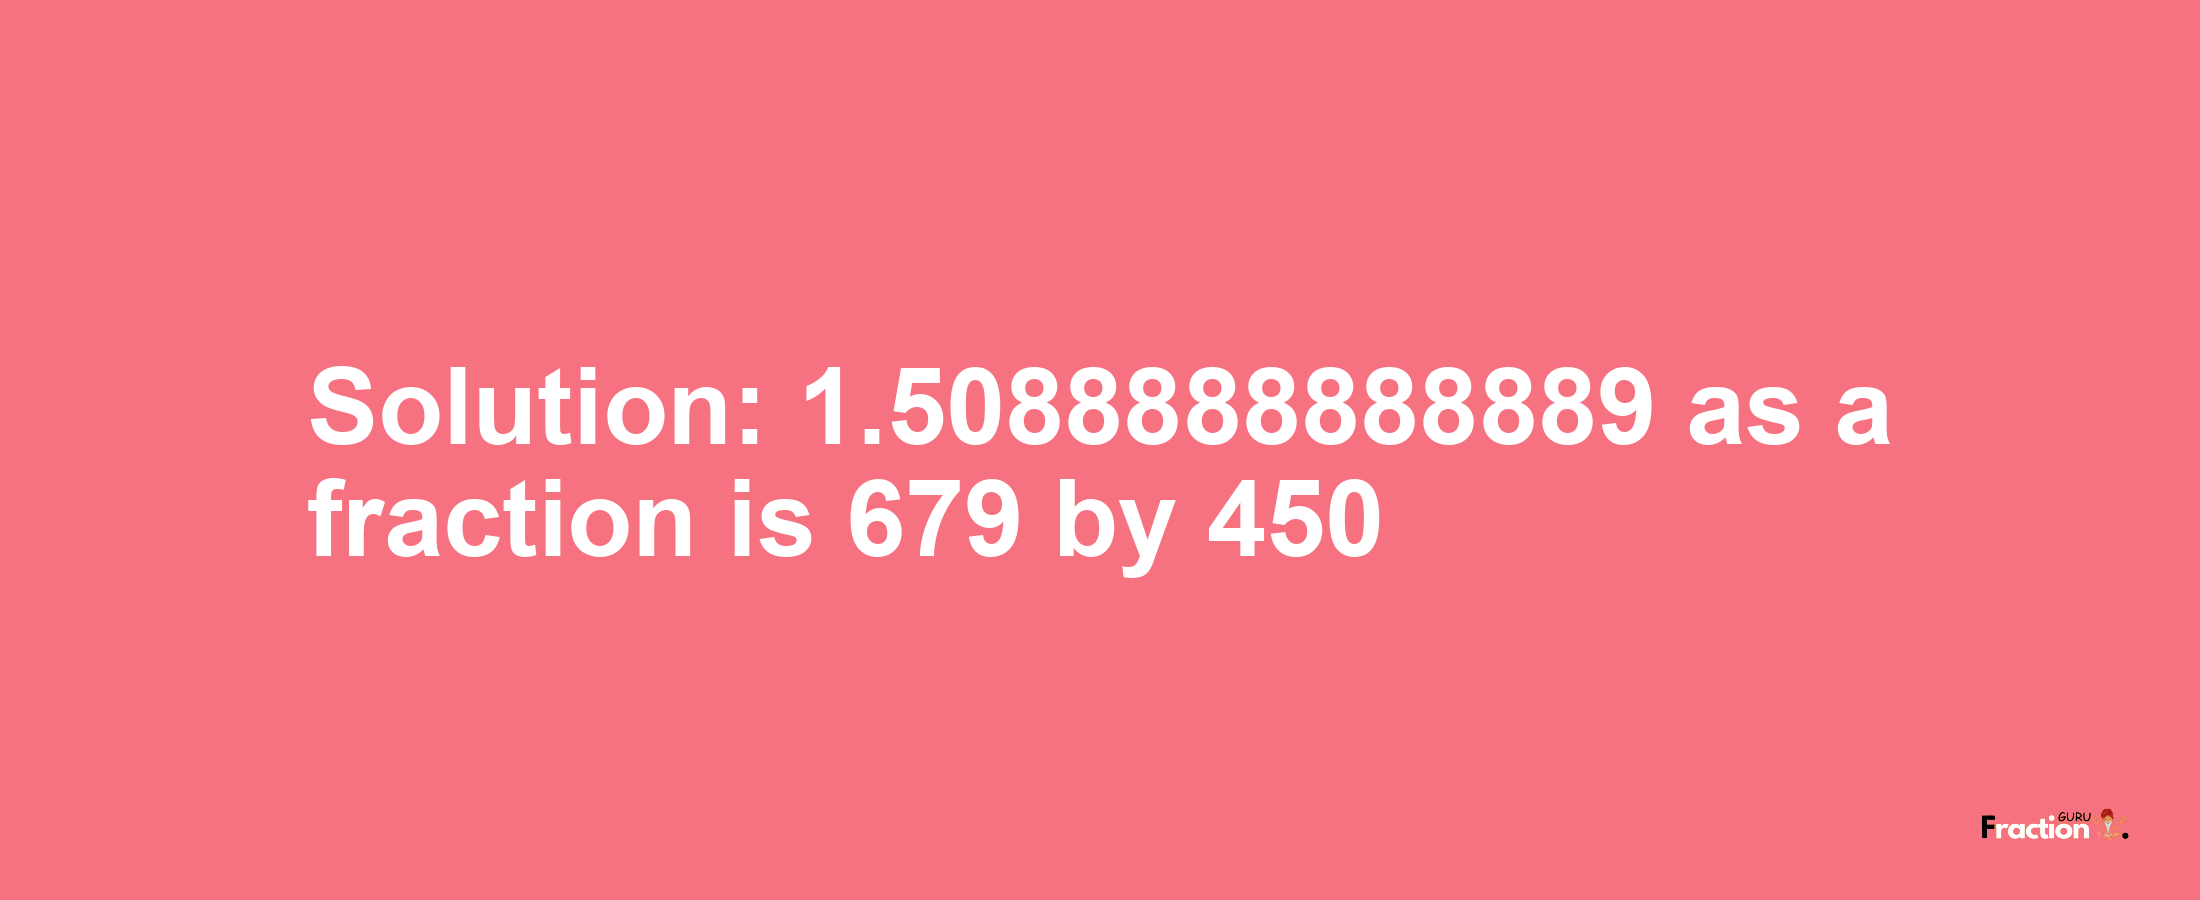 Solution:1.5088888888889 as a fraction is 679/450